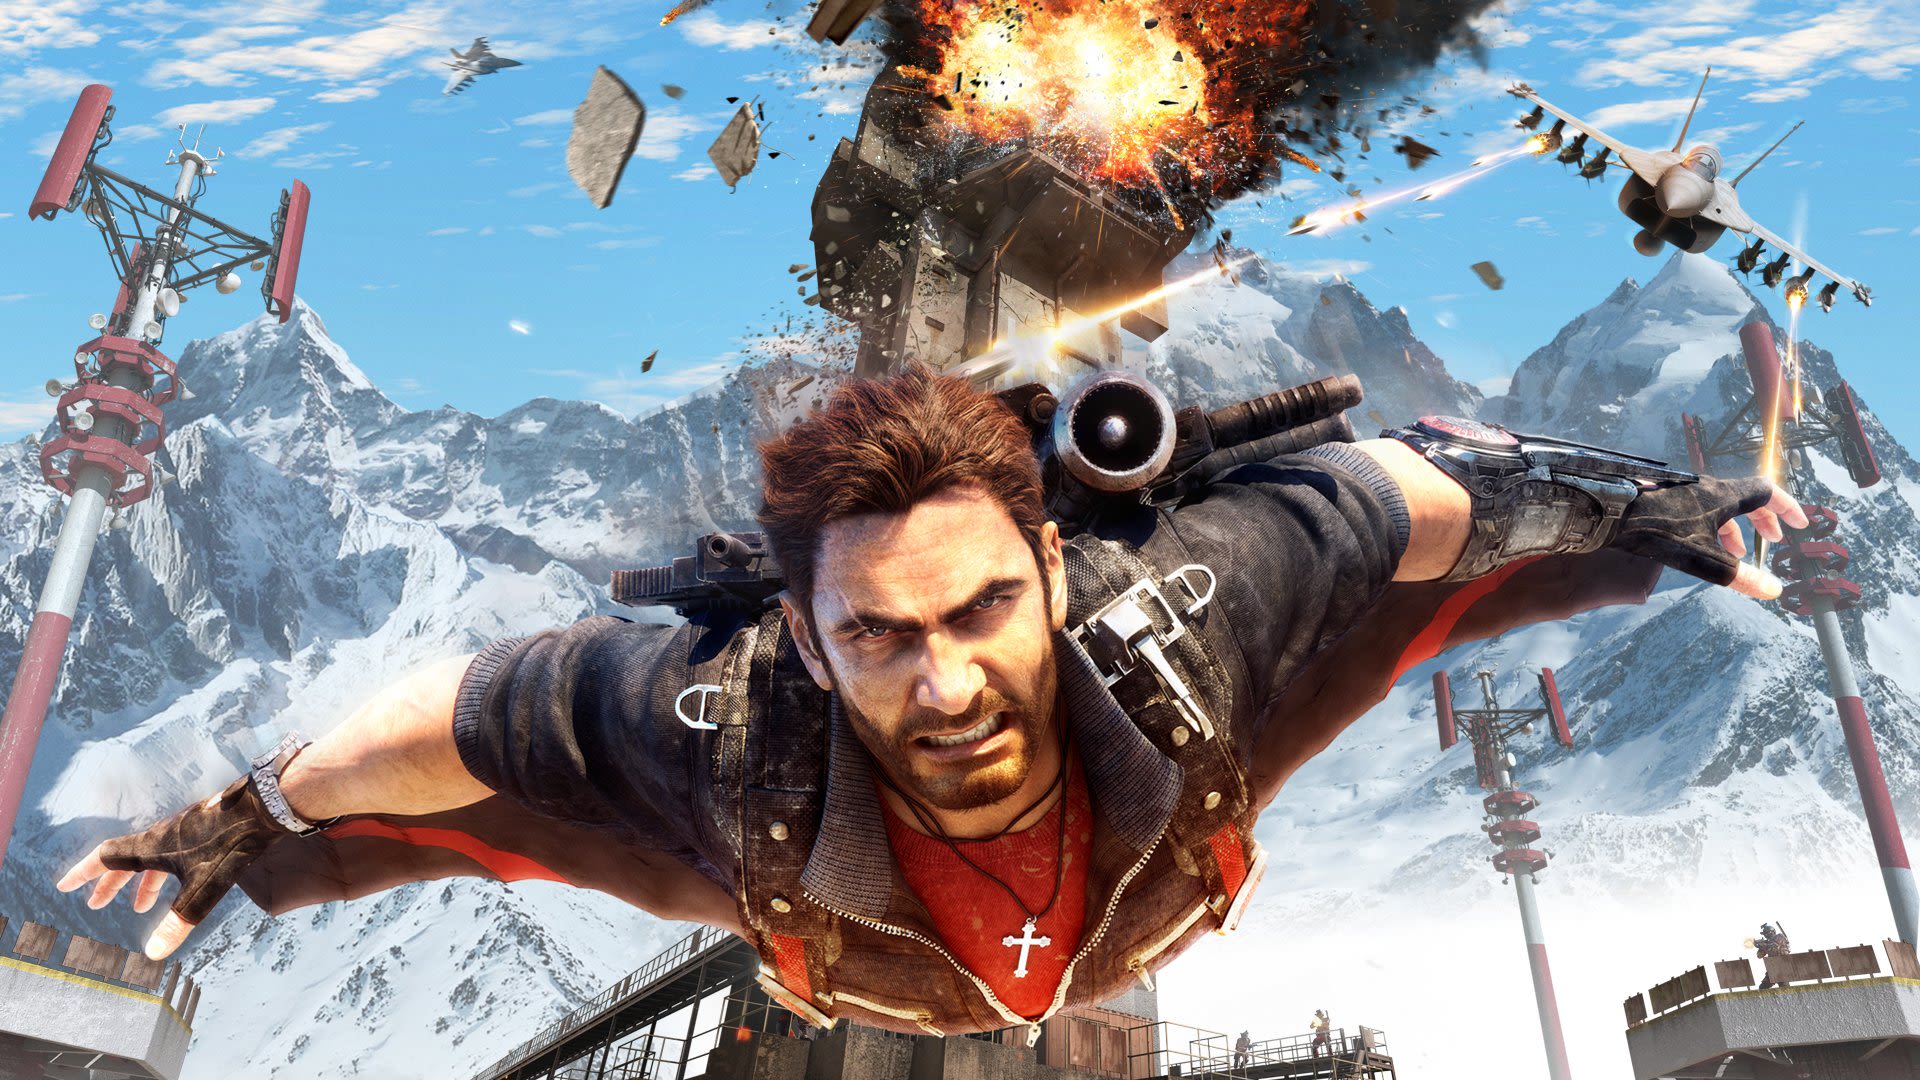 Just Cause studio Avalanche lays off 50 people and closes two studios, including one it opened less than a year ago